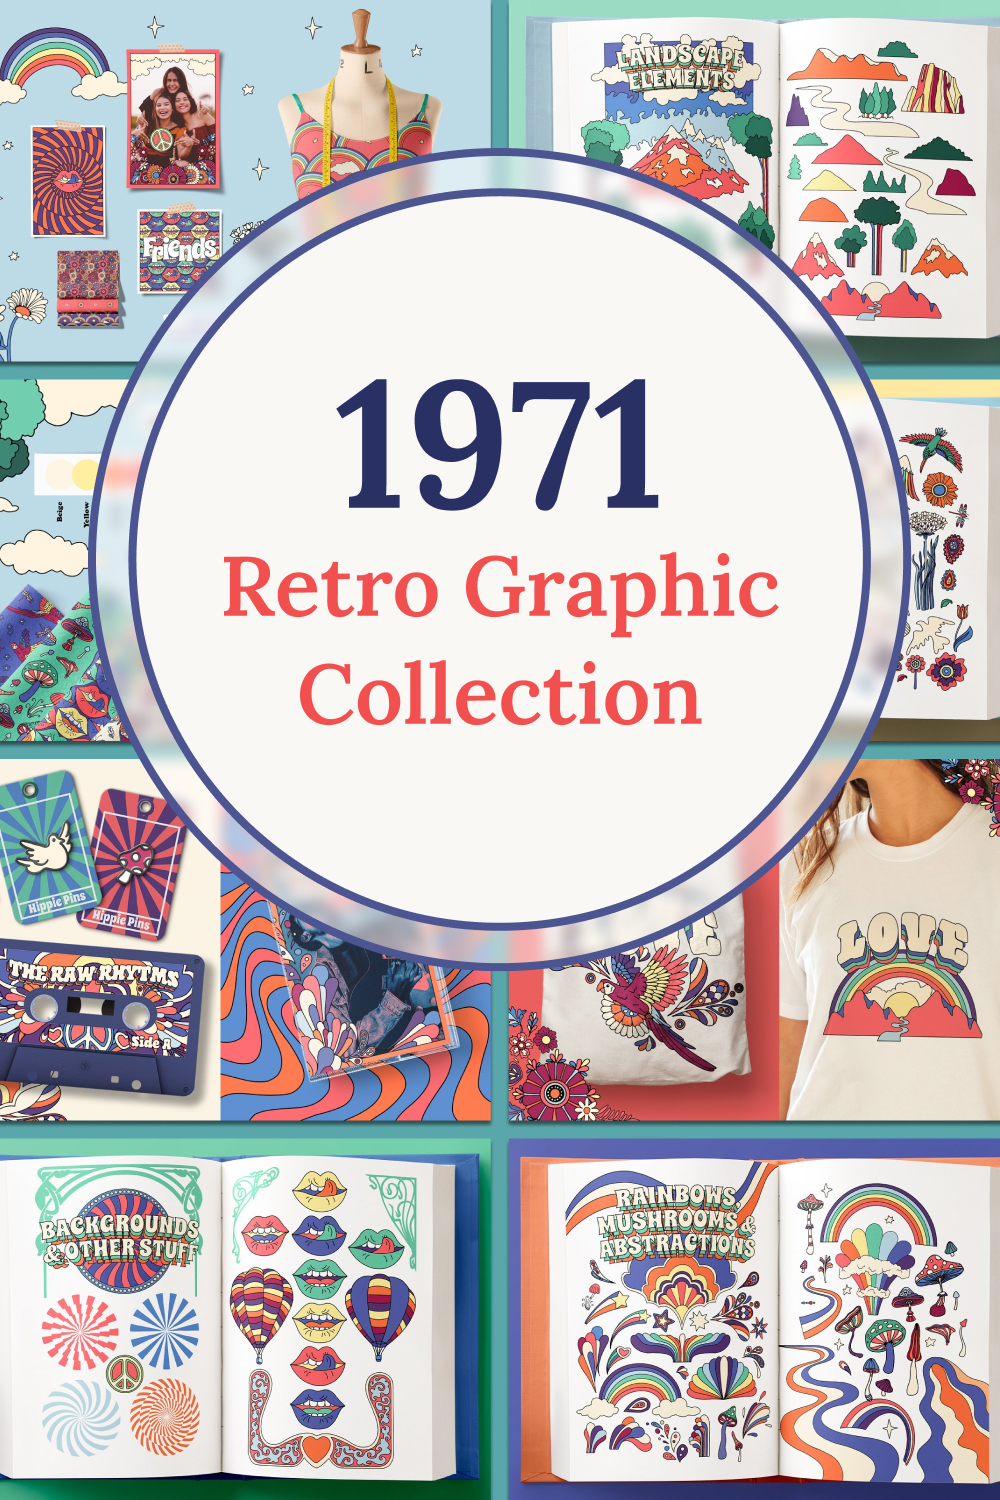 Retro graphic collection of pinterest.